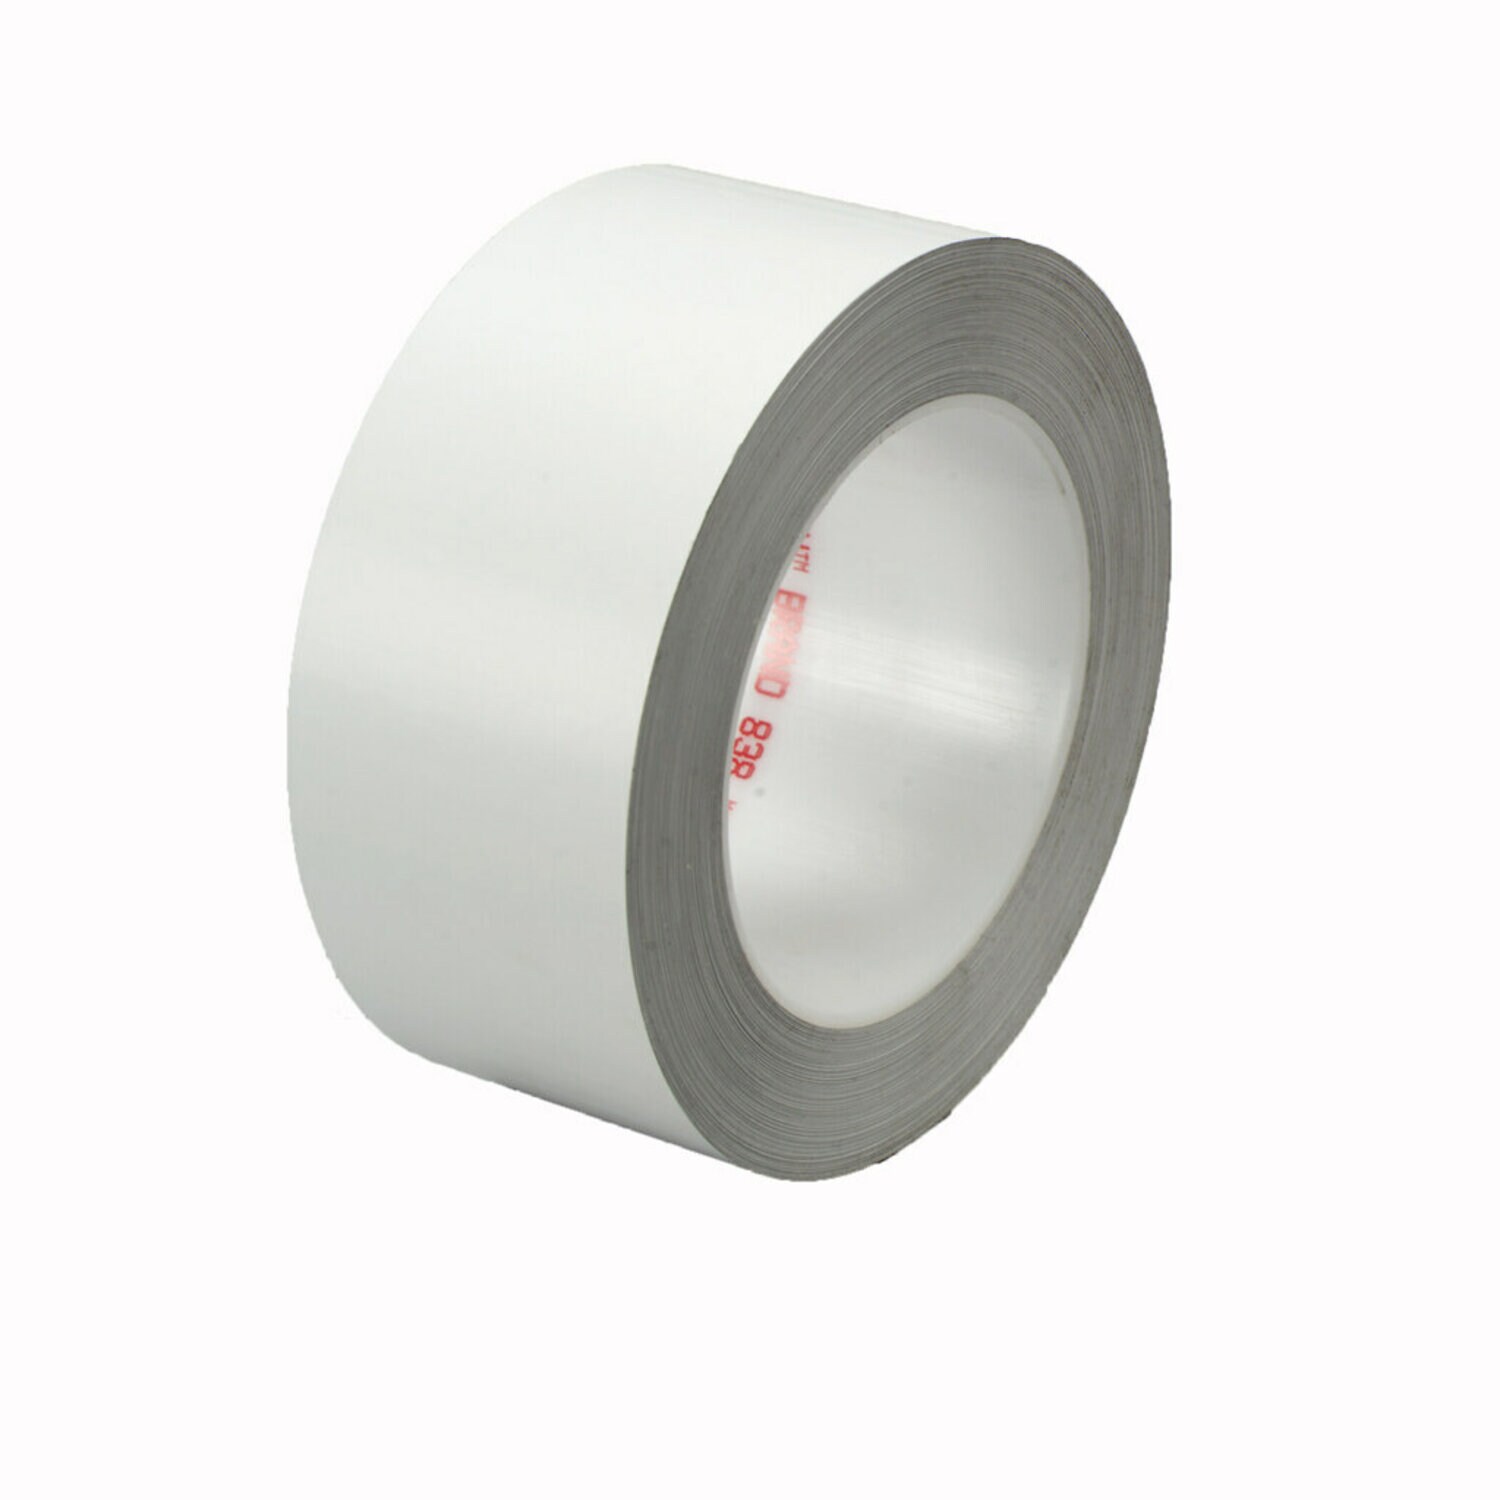 7010048659 - 3M Weather Resistant Film Tape 838, White, 6 in x 72 yd, 3.4 mil, 8
Roll/Case